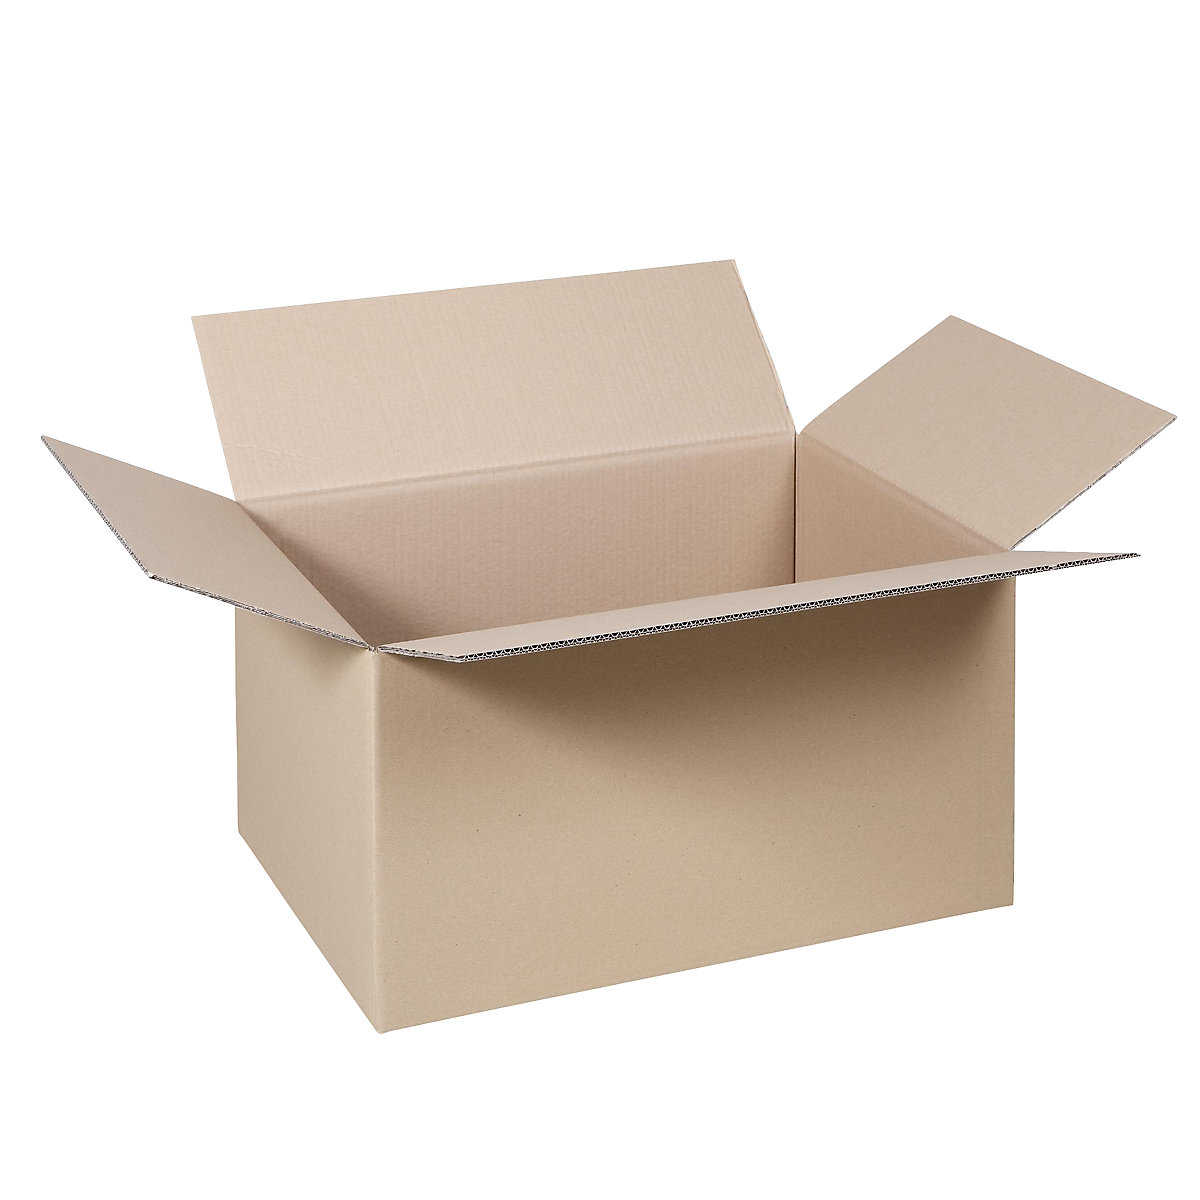 Folding cardboard box, FEFCO 0201, made of double fluted cardboard, internal dimensions 605 x 455 x 180 mm, pack of 100-44